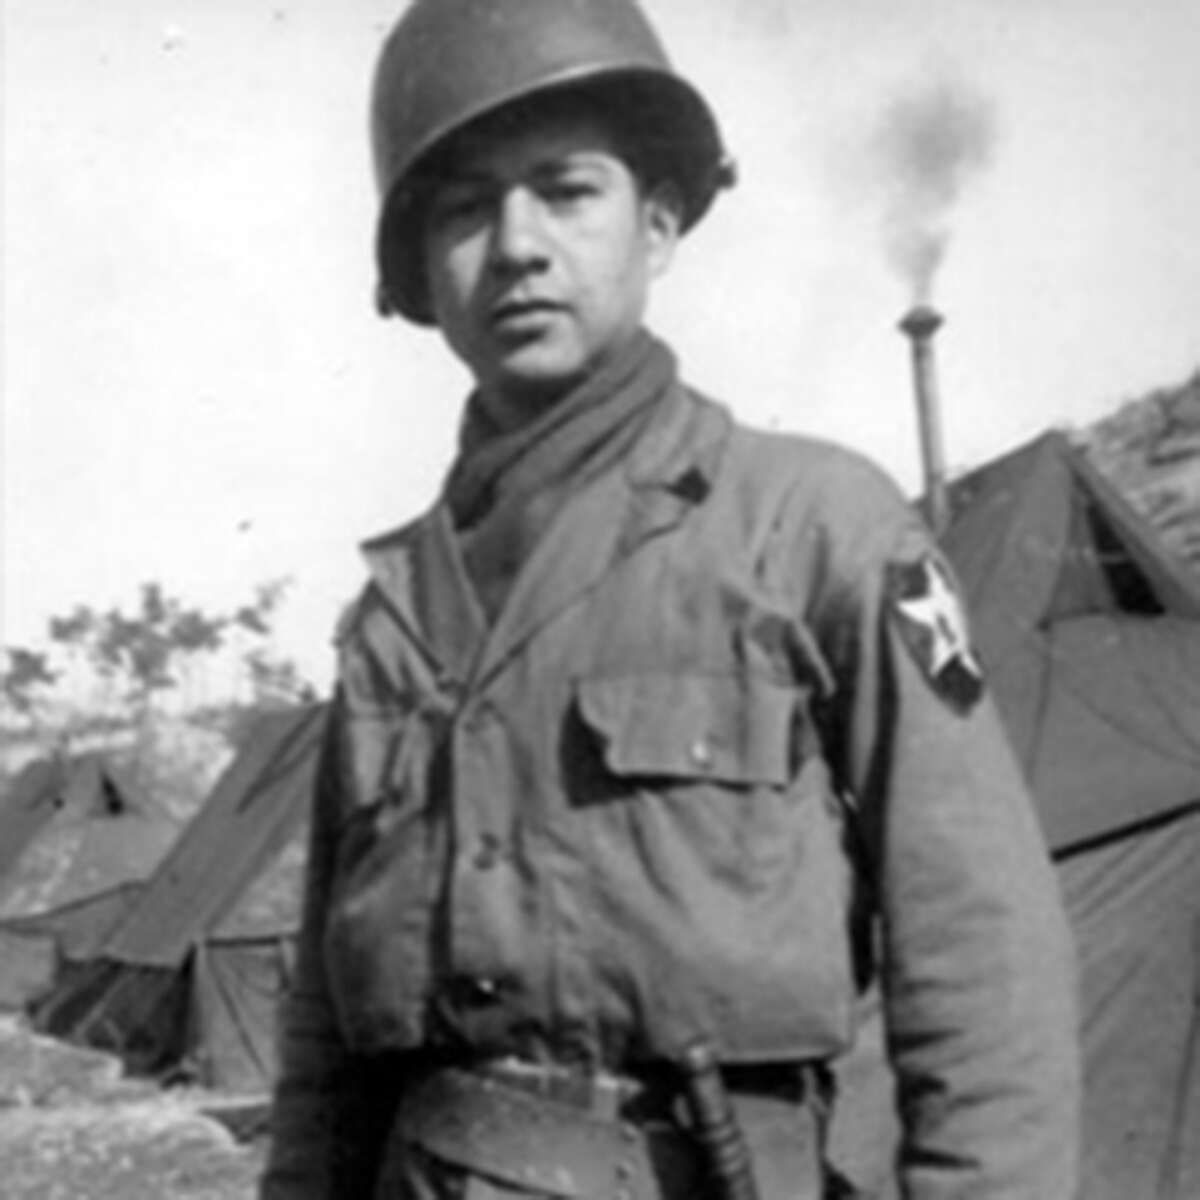 Medal of Honor nominee Victor H. Espinoza, was born in El Paso, Texas, July 15, 1929. Then-Cpl. Victor H. Espinoza is being recognized for his actions on Aug. 1, 1952, at Chorwon, Korea. While spearheading an attack to secure "Old Baldy," Espinozaâ€™s unit was pinned down by withering fire from fortified positions. In daring succession, Espinoza single-handedly silenced a machine-gun and its crew, discovered and destroyed a covert enemy tunnel, and wiped out two bunkers. His actions inspired his unit and enabled them to secure the strong-point against great odds. After leaving the Army, Espinoza resided in El Paso until his death on April 17, 1986. Espinoza is buried at Fort Bliss National Cemetery. In addition to the Medal of Honor, Espinoza received the Distinguished Service Cross (this award will be upgraded to the Medal of Honor on Mar. 18), National Defense Service Medal, Korean Service Medal with one Bronze Service Star, Combat Infantryman Badge, United Nations Service Medal, and Republic of Korea-Korean War Service Medal.